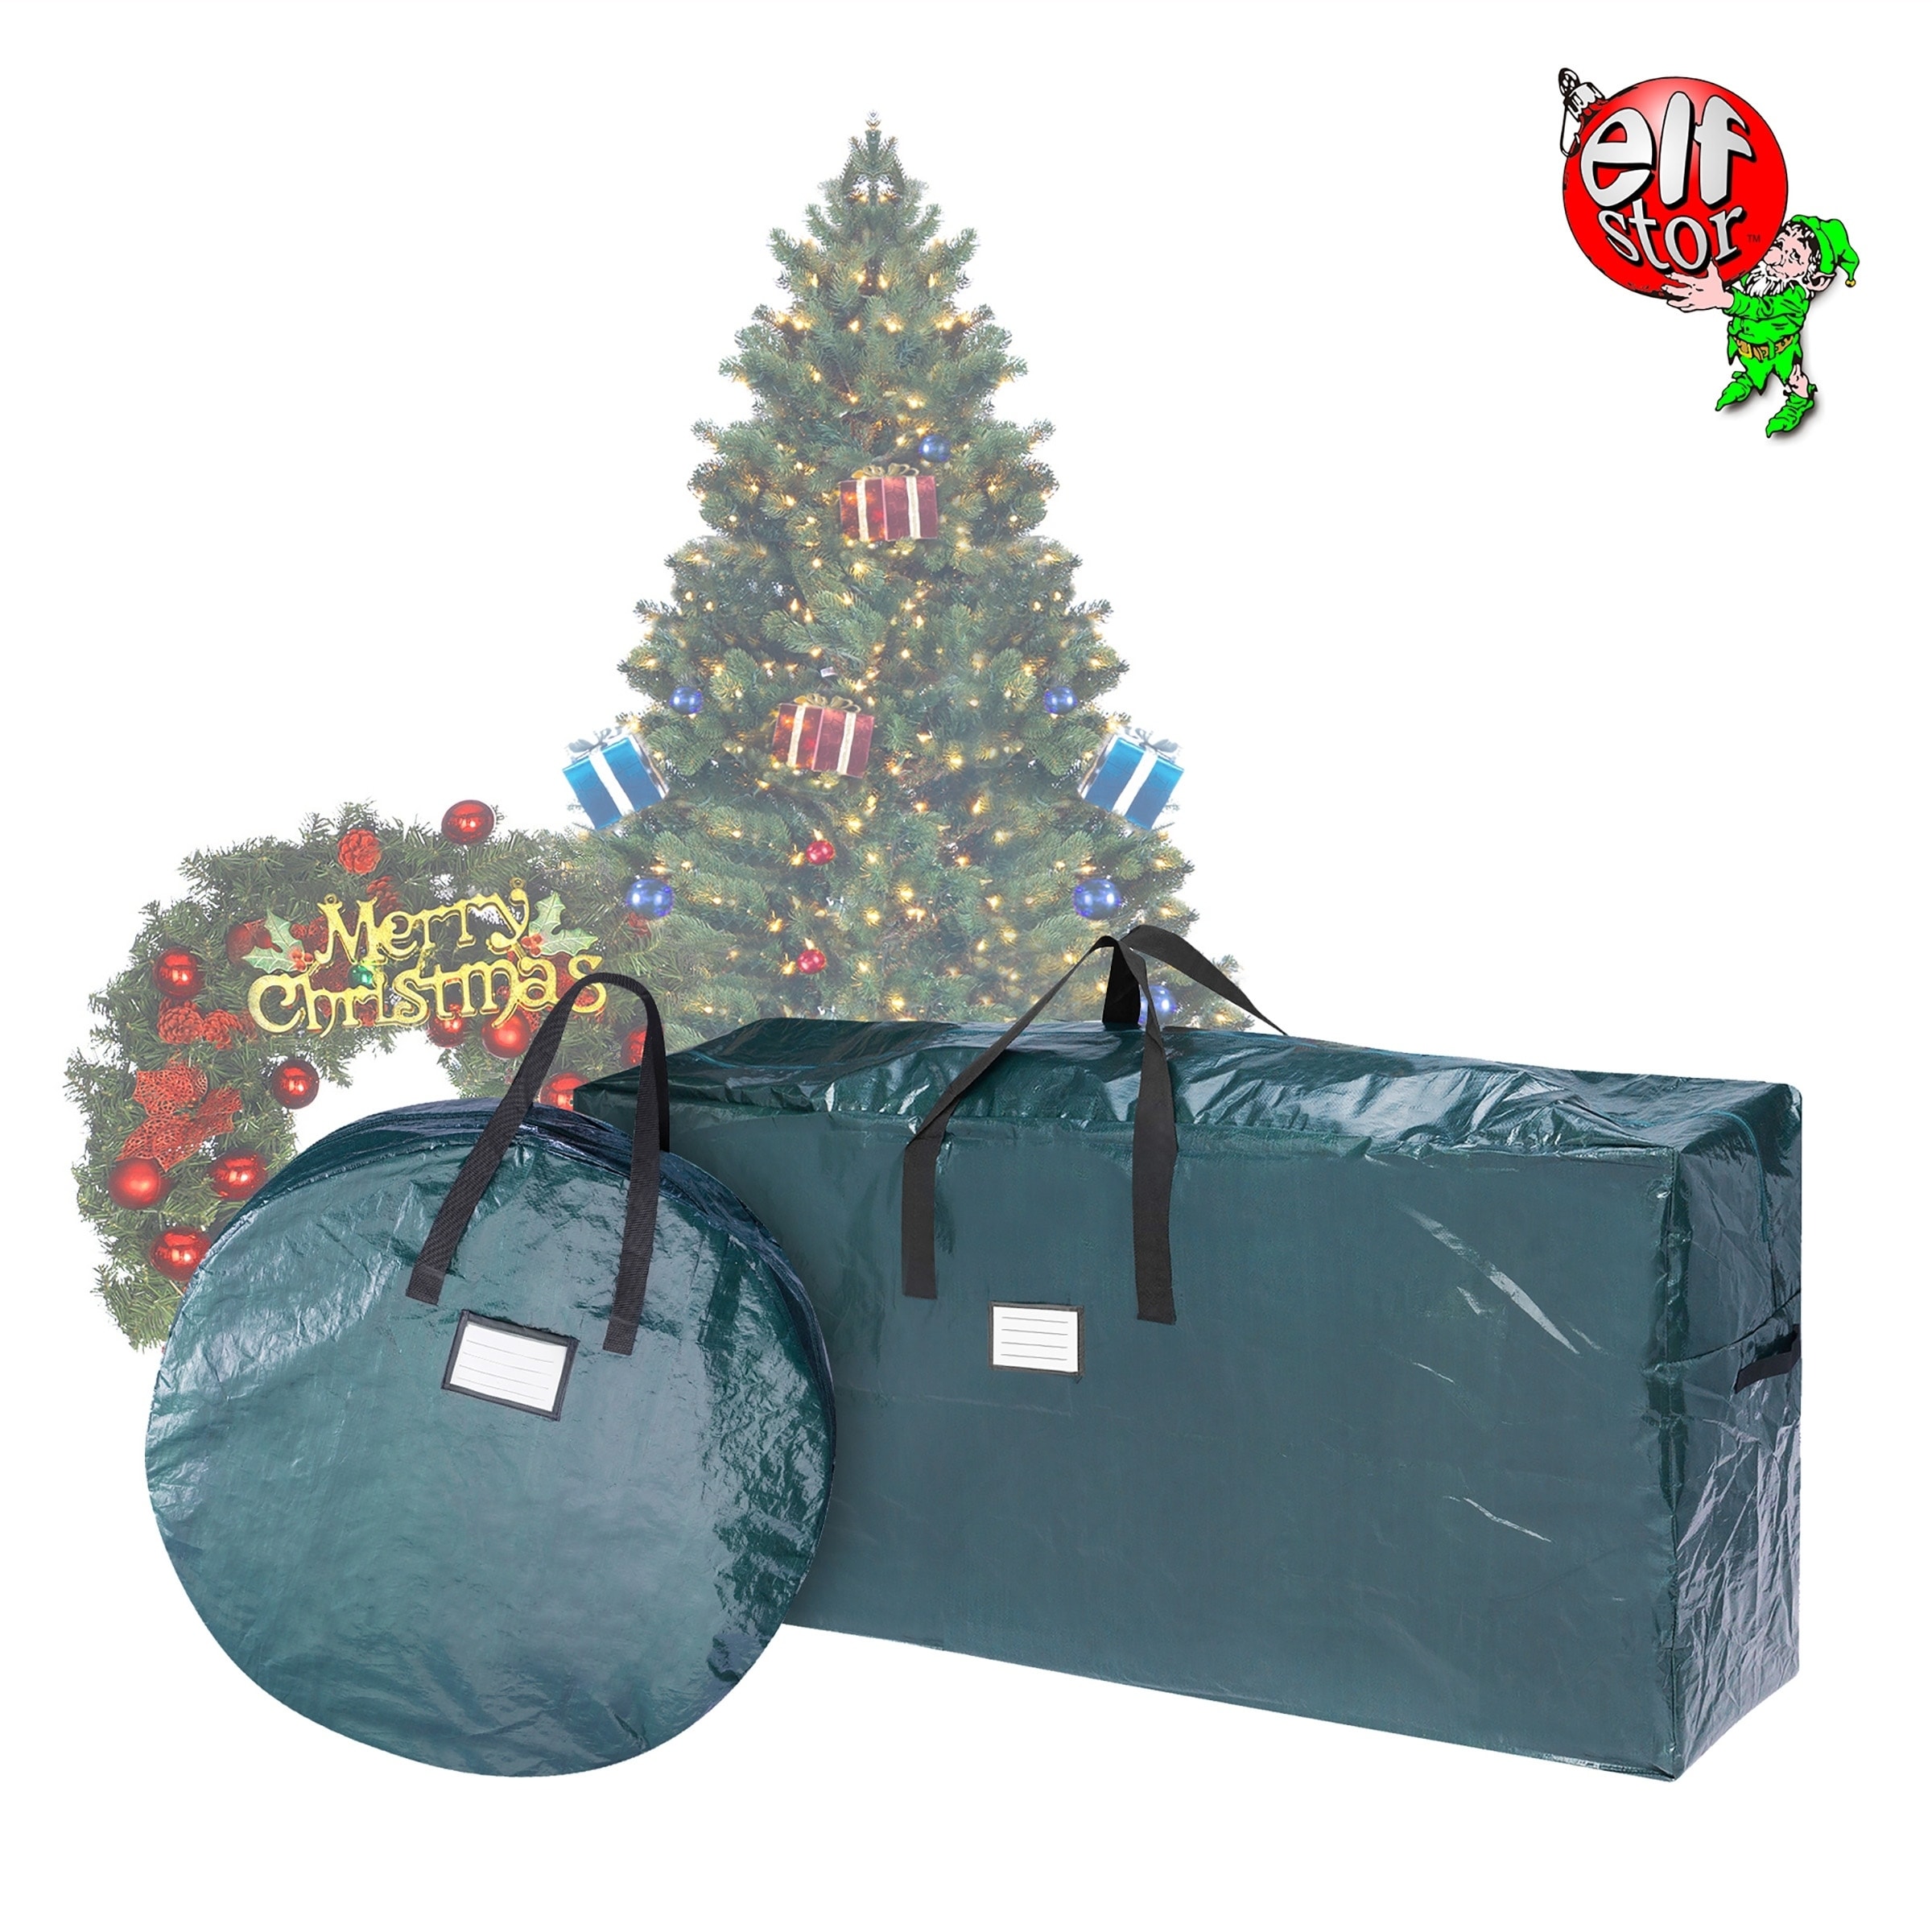 Elf Stor Deluxe Heavy-Duty Christmas Tree Canvas Storage Bag for